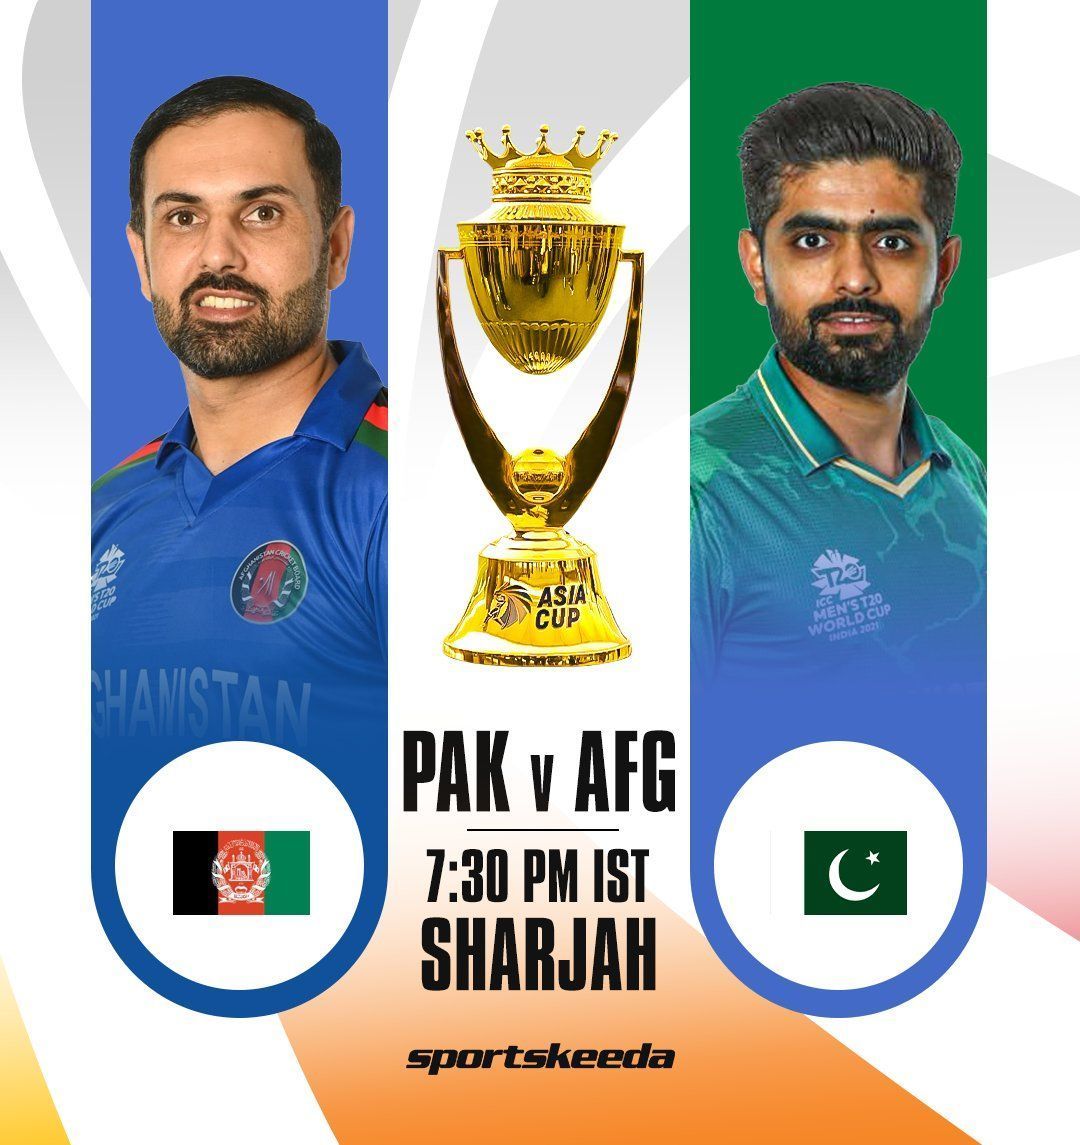 Pakistan will face Afghanistan on Wednesday for a Super 4 clash [Pic Credit: Sportskeeda]